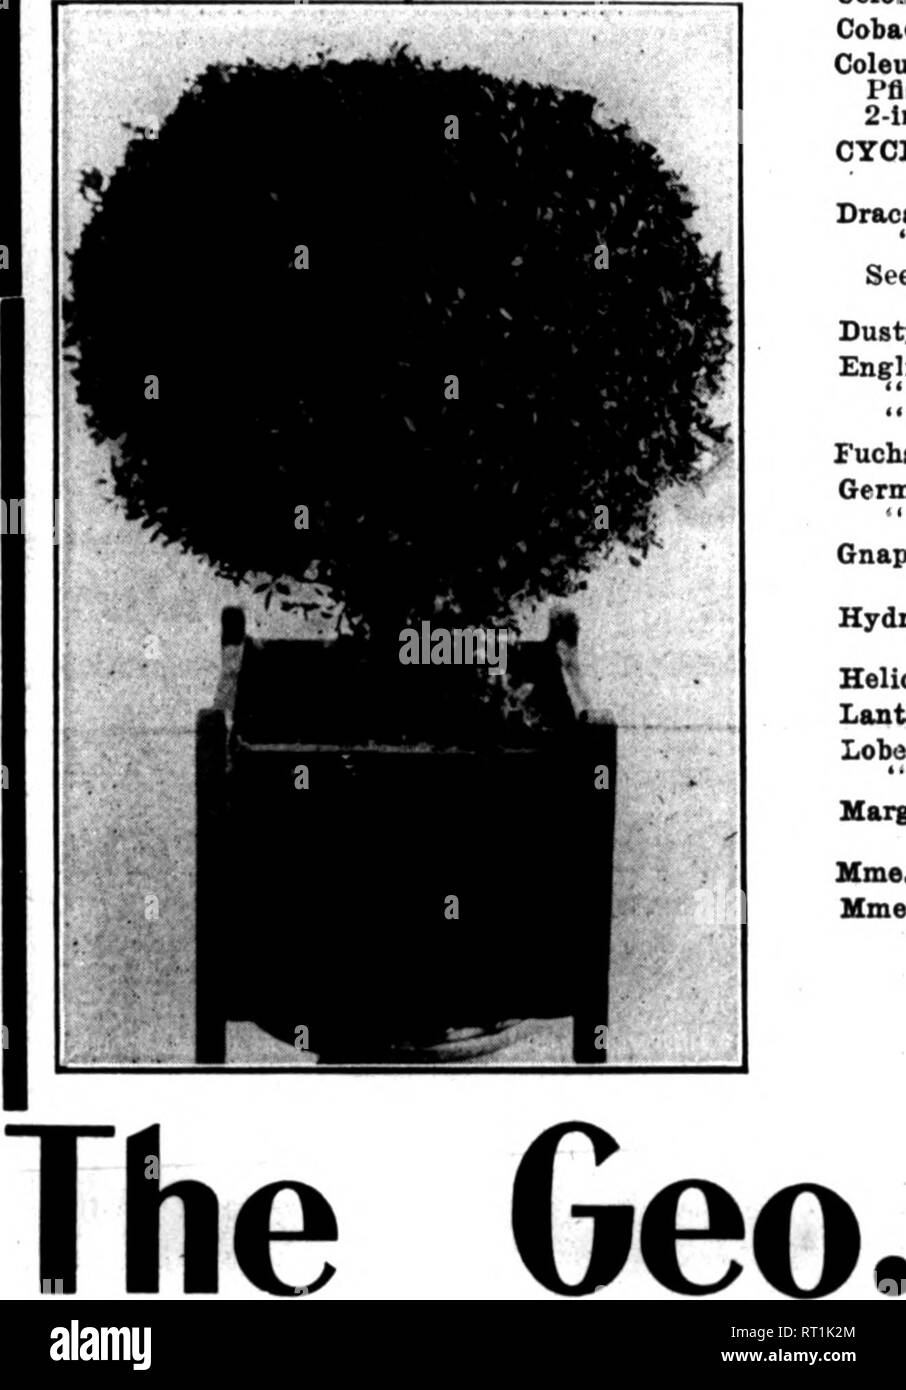 . Florists' review [microform]. Floriculture. 80 The Weekly Florists' Review. Max 23, 1912. BEDDING PLANTS A fine lot of extra choice Btock; clean, well grown and healthy, offered at low prices to make room. ROSES In pots. Lady Oar, Hiawatha, Hermosa, Vlower of Fairfield, Baby Dorothy, Yellow Kambler, White Bambler, Slasna Charta, Capt. Hayward each %5c. Eacb. Aohyranthes, 2-ln $0,02^4 3-ln 05 Agenitum, 2-ln 02% 3-In .05 4-ln 07 Altemantheras, 2-ln 02% Caladium Esoulentum, 6-in 15 Cannai, Florence Vaughan, Austria, 4-ln.. .12 Celoaia or Cooksoombs, 3-ln 05 Cobaea Scandens, 4-ln 08 Coleus, Beck Stock Photo